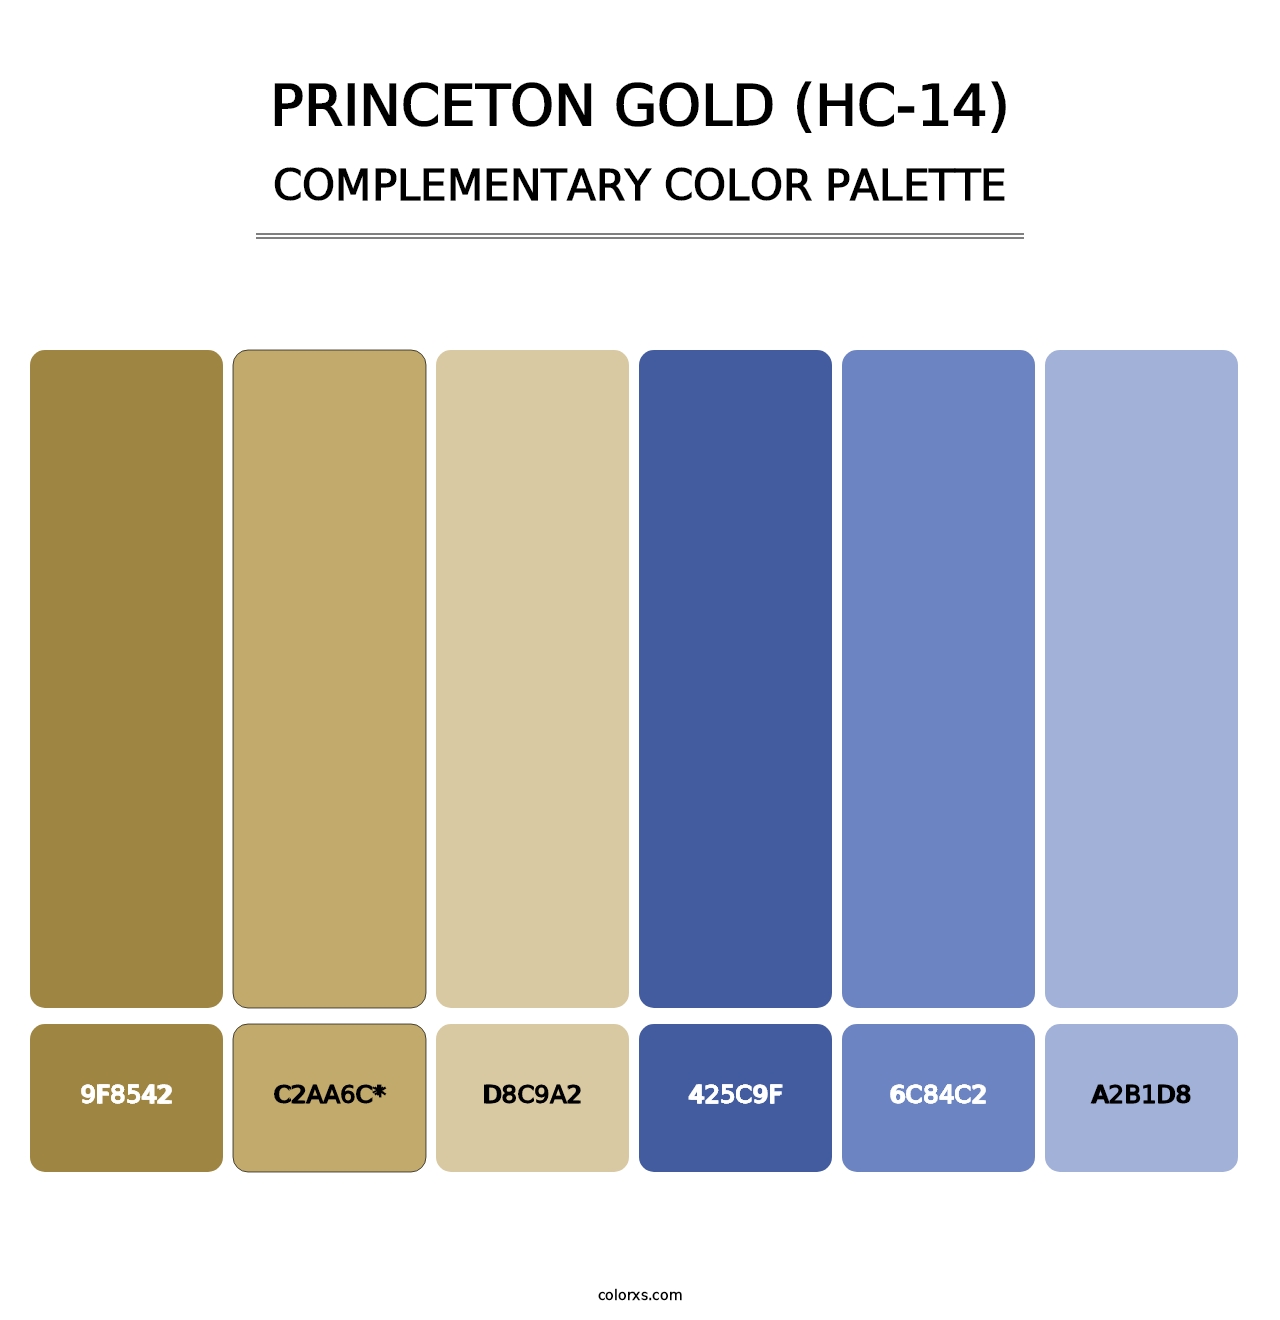 Princeton Gold (HC-14) - Complementary Color Palette